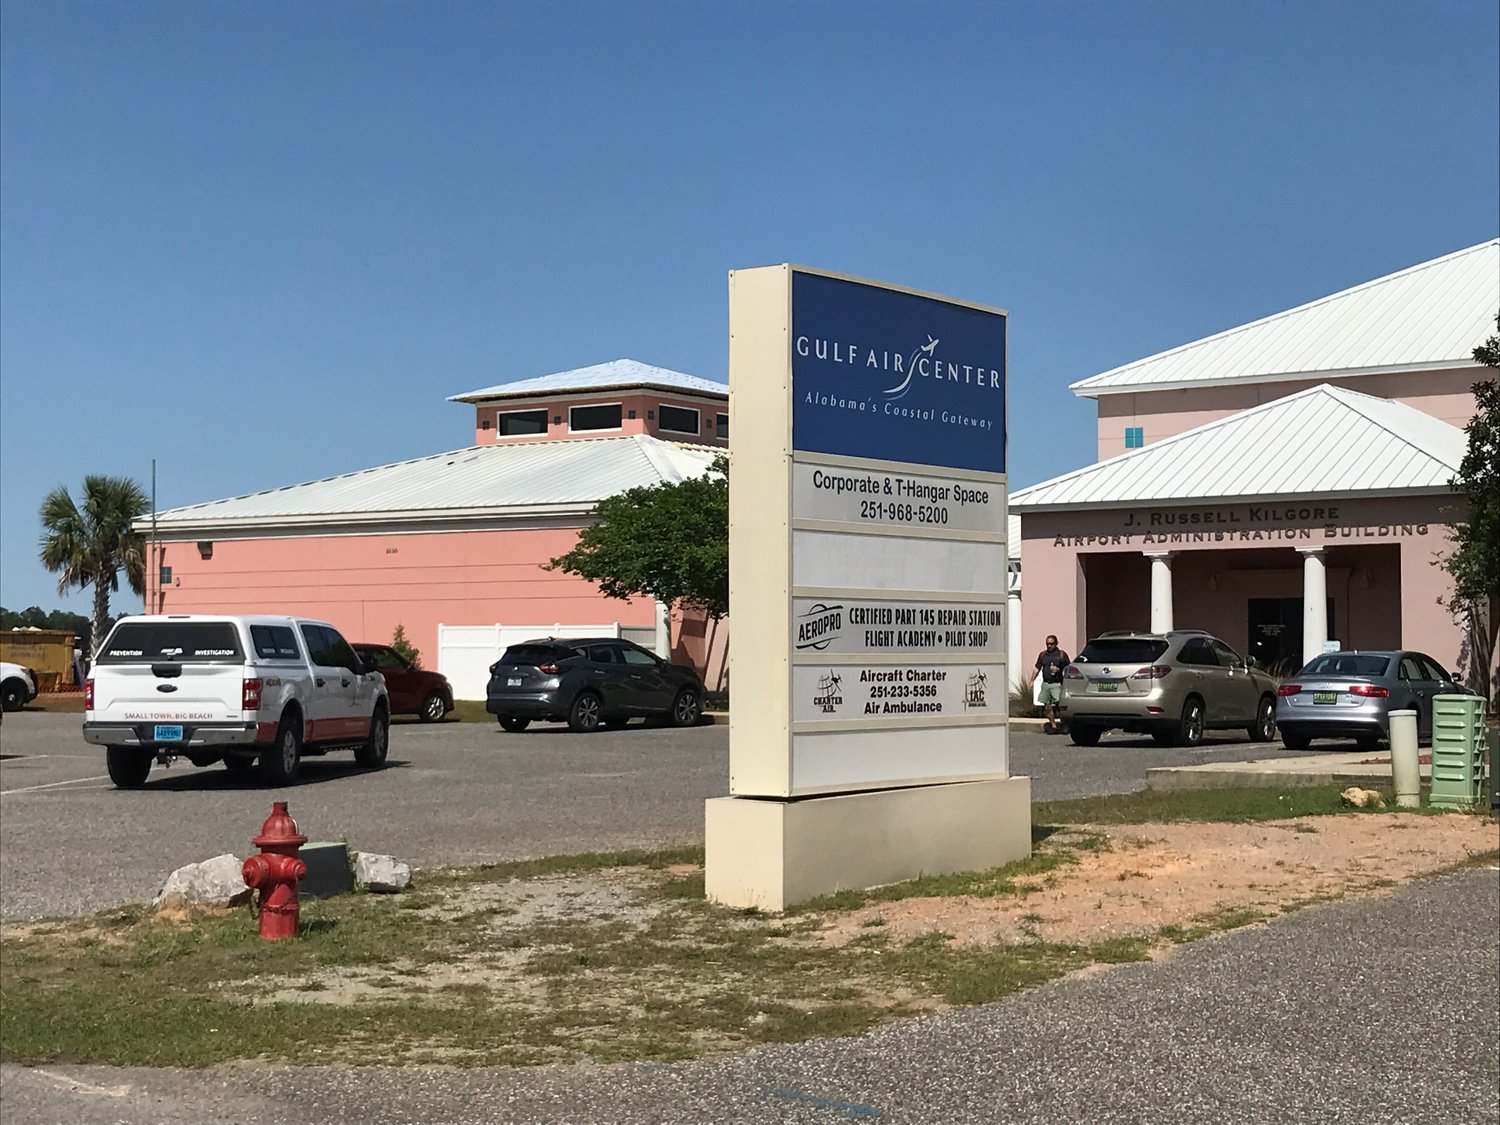 Commercial airline flights from Jack Edwards Field could start by Labor Day under plans proposed to the Gulf Shores City Council.